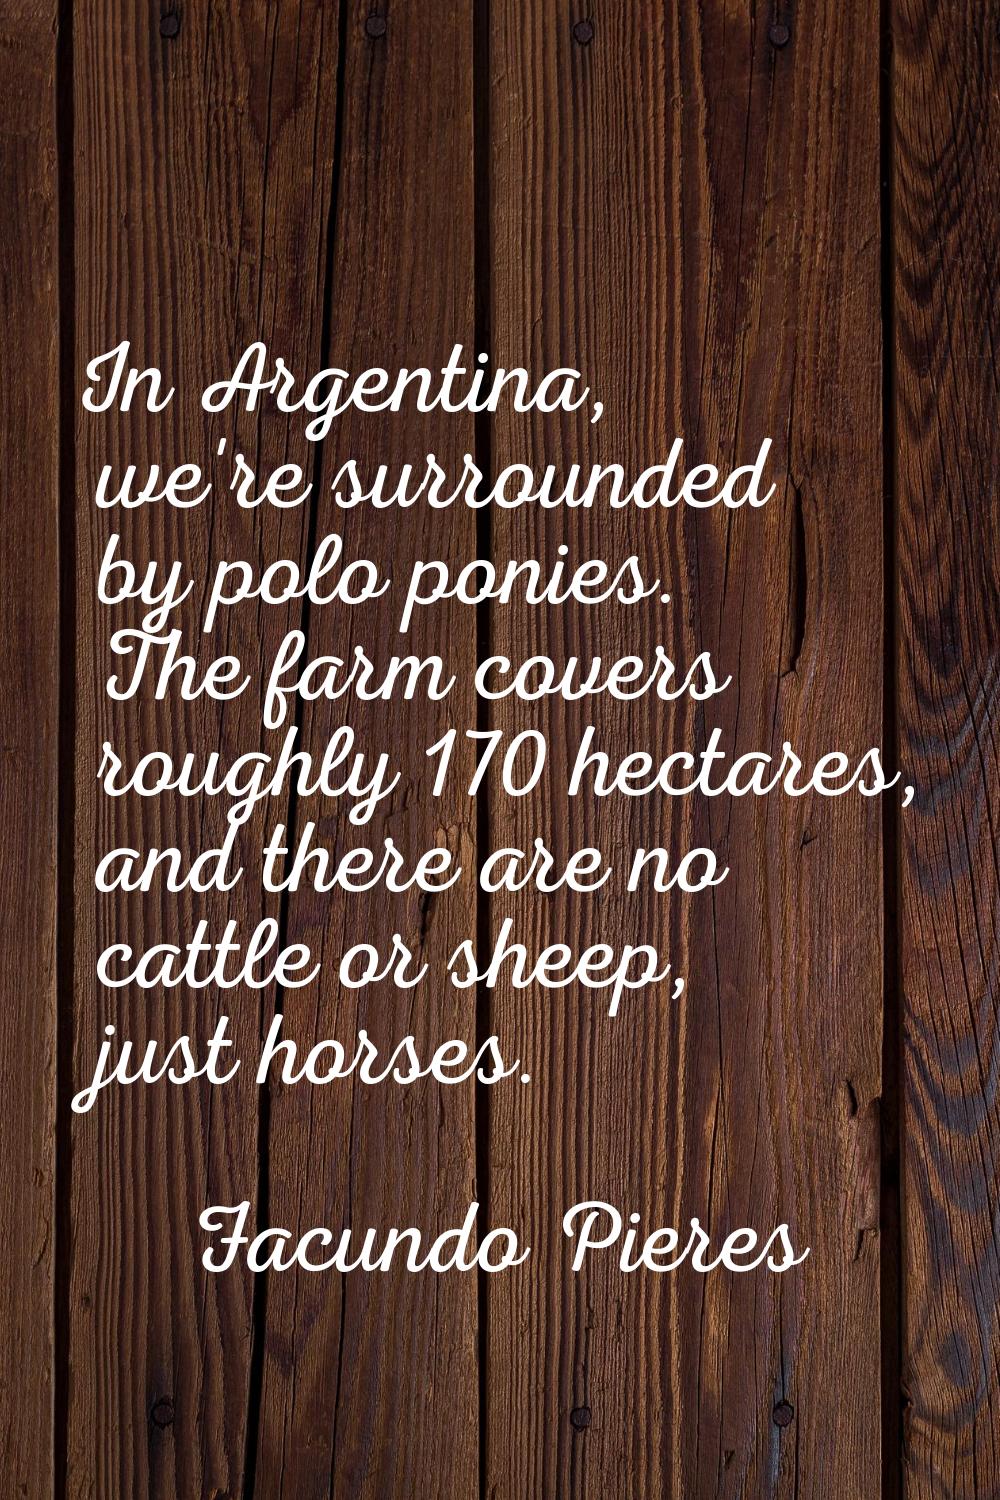 In Argentina, we're surrounded by polo ponies. The farm covers roughly 170 hectares, and there are 